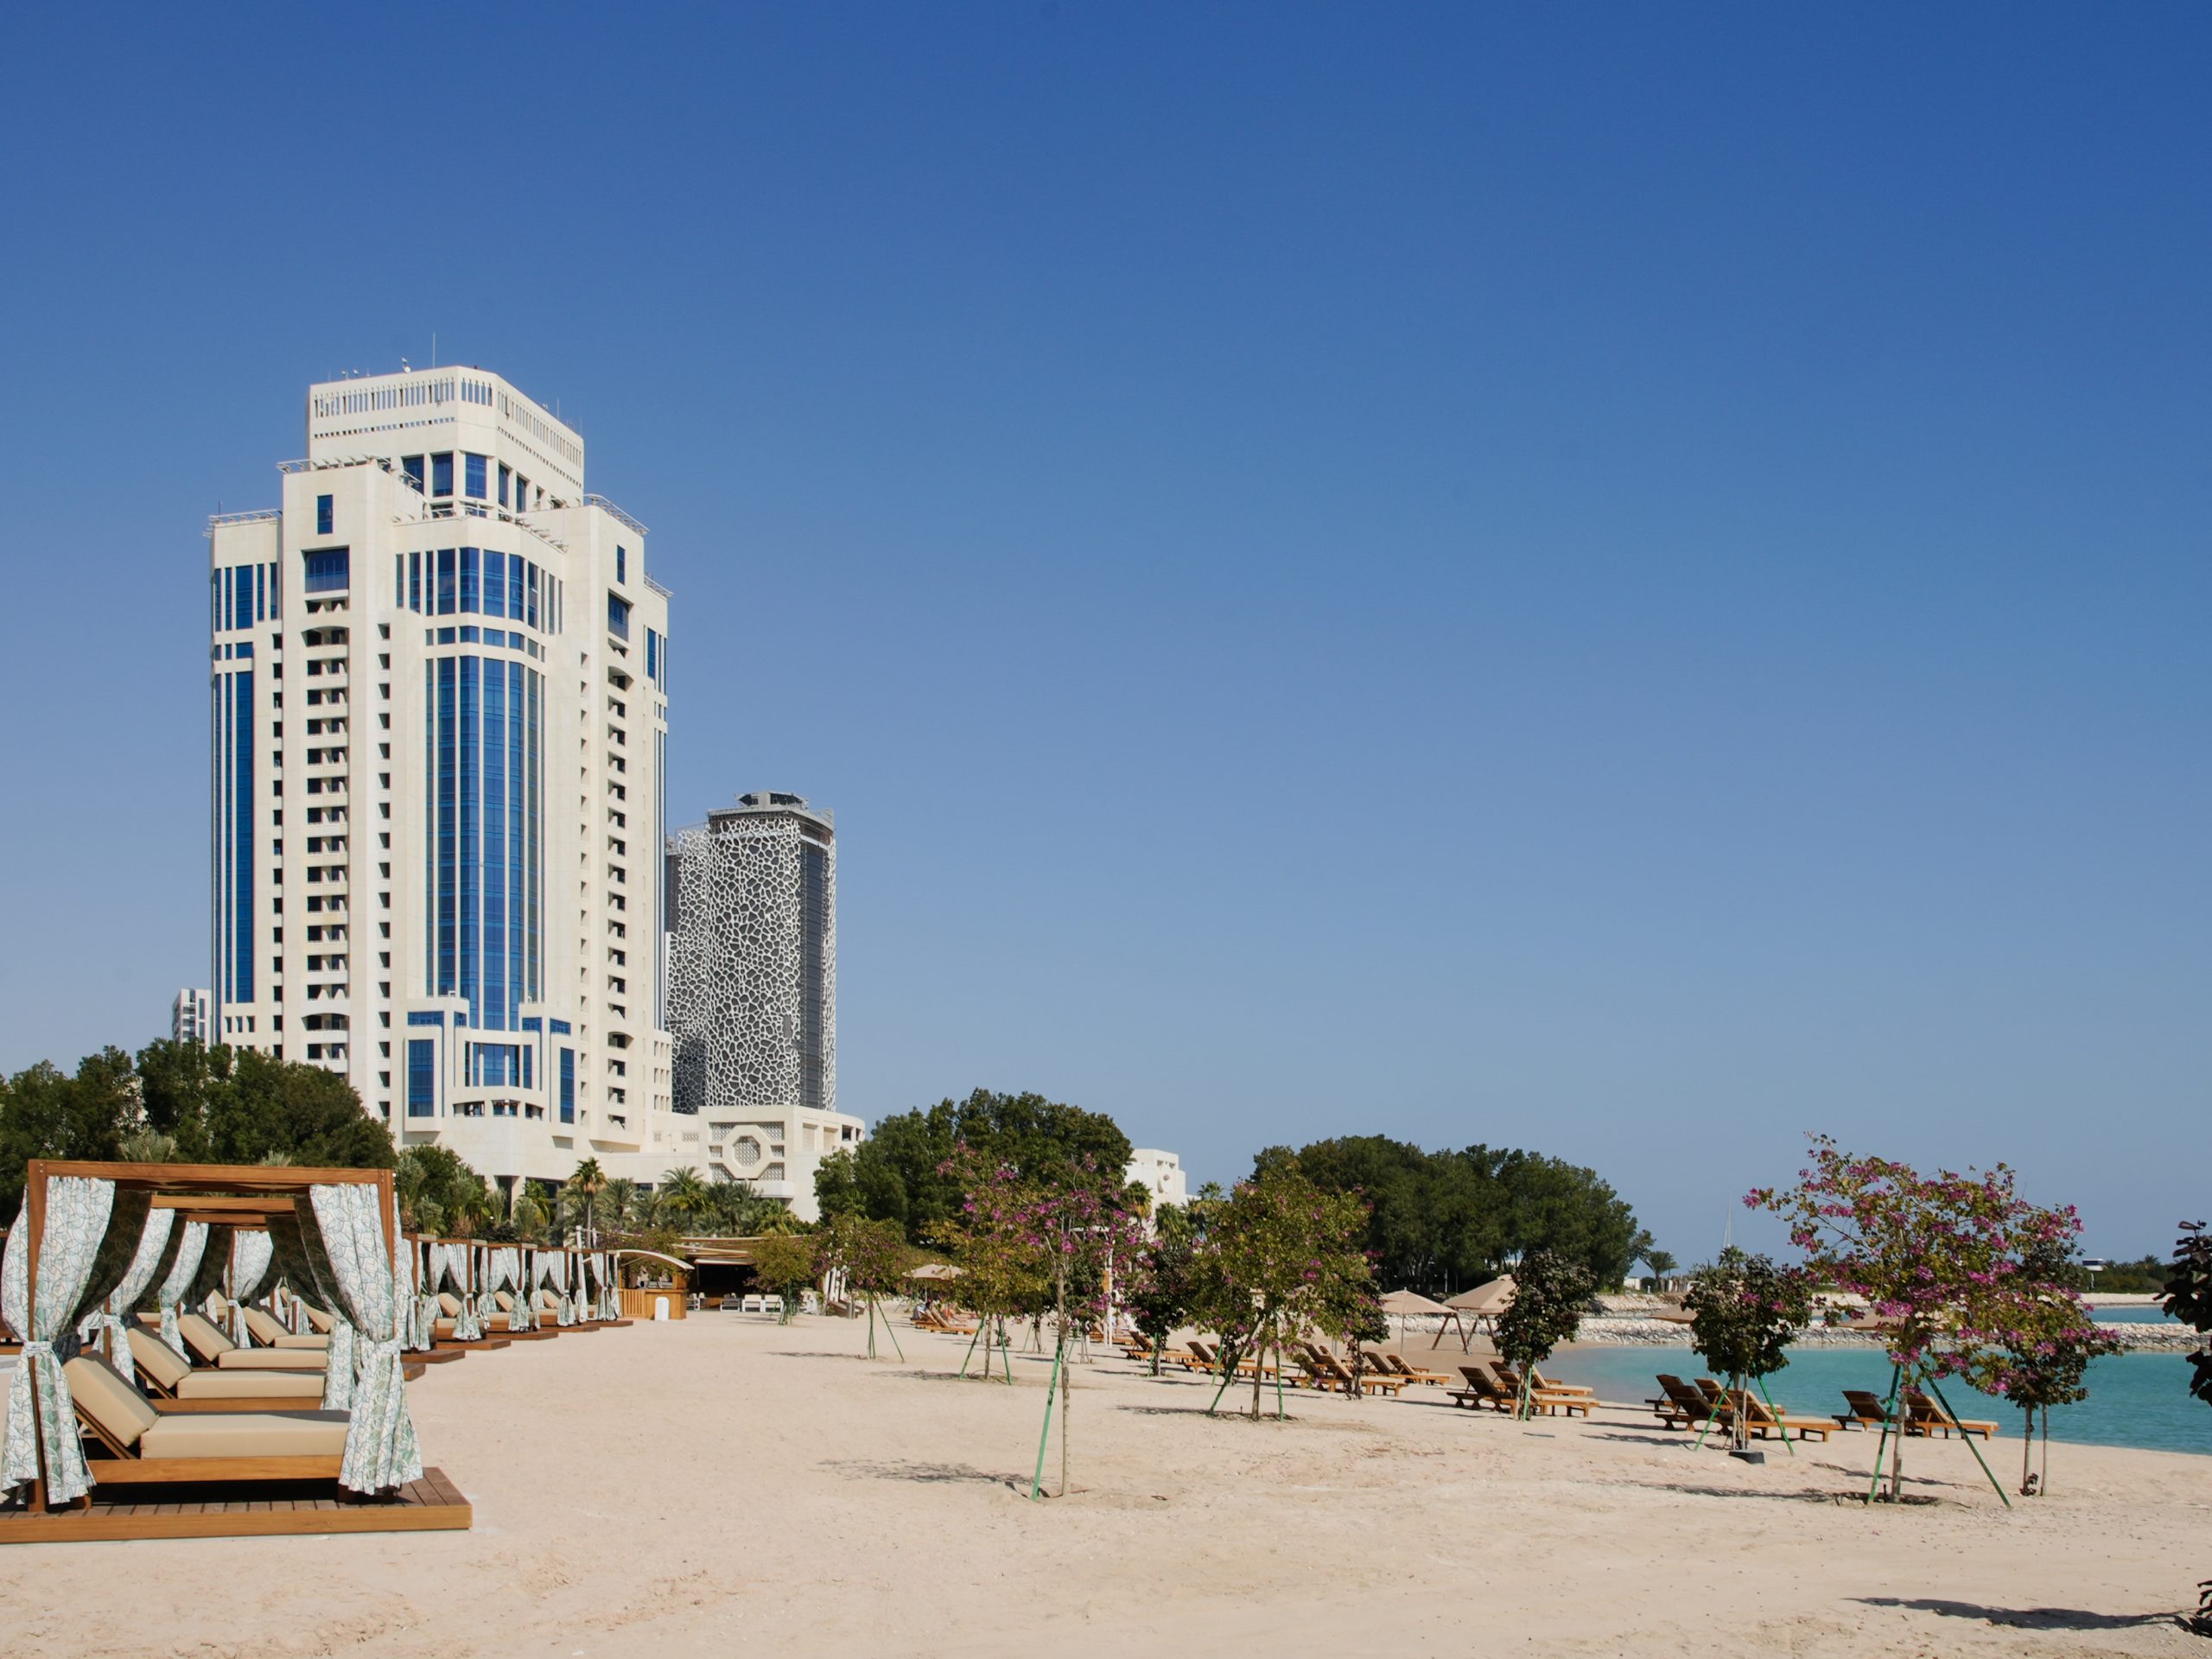 THE RITZ-CARLTON, DOHA COMPLETES A COMPREHENSIVE BEACHFRONT LANDSCAPING AND REPLANTING PROGRAM